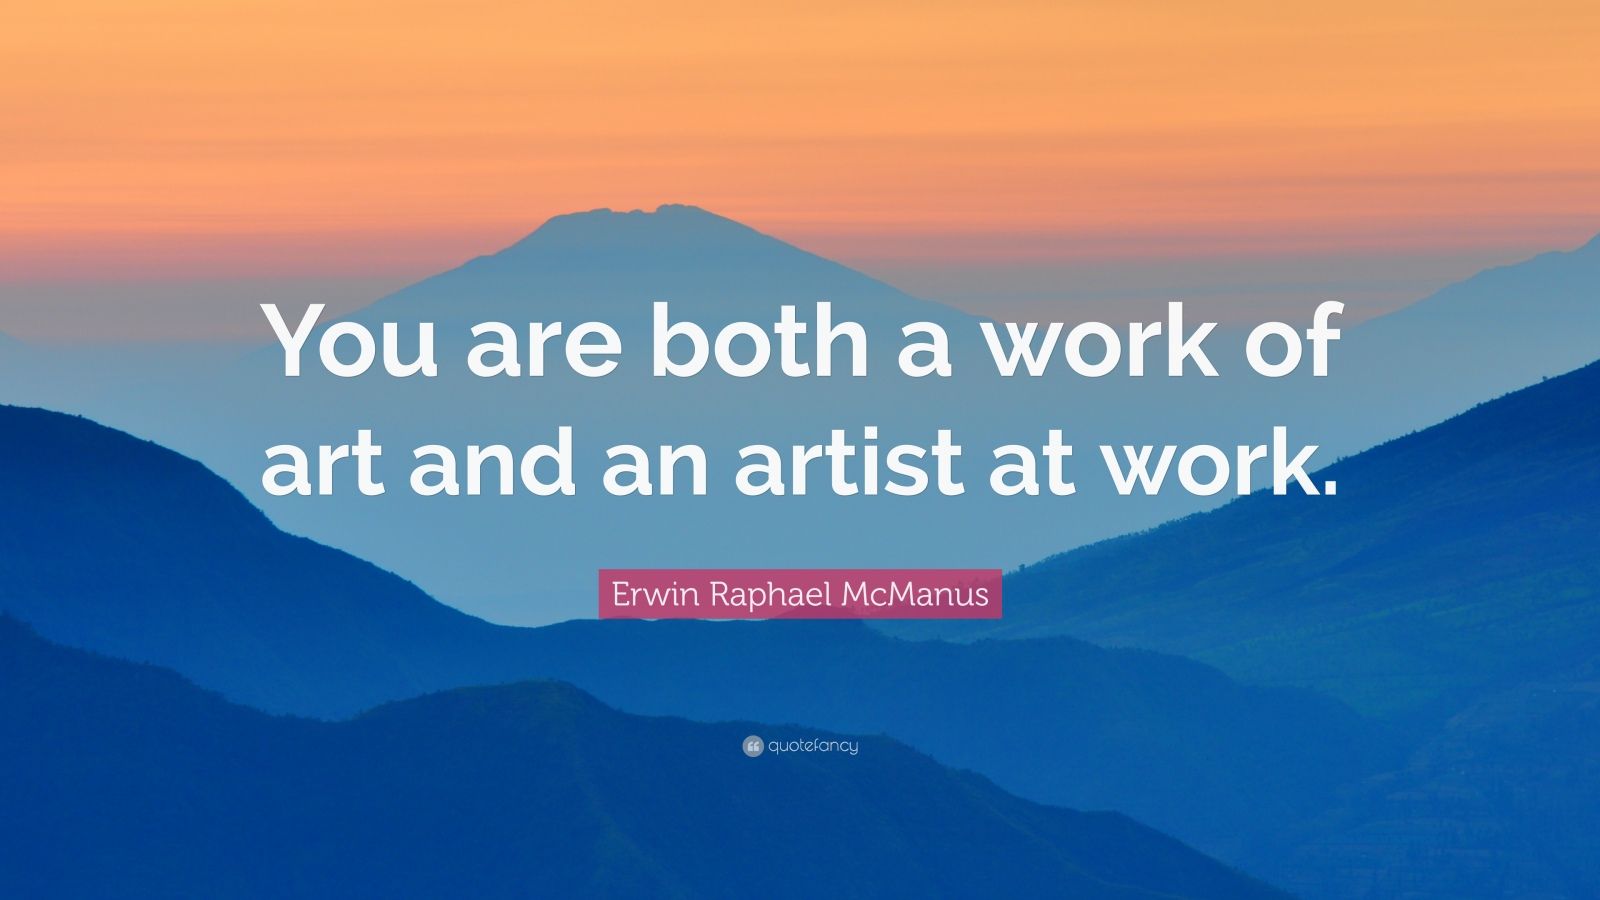 Erwin Raphael McManus Quote “You are both a work of art